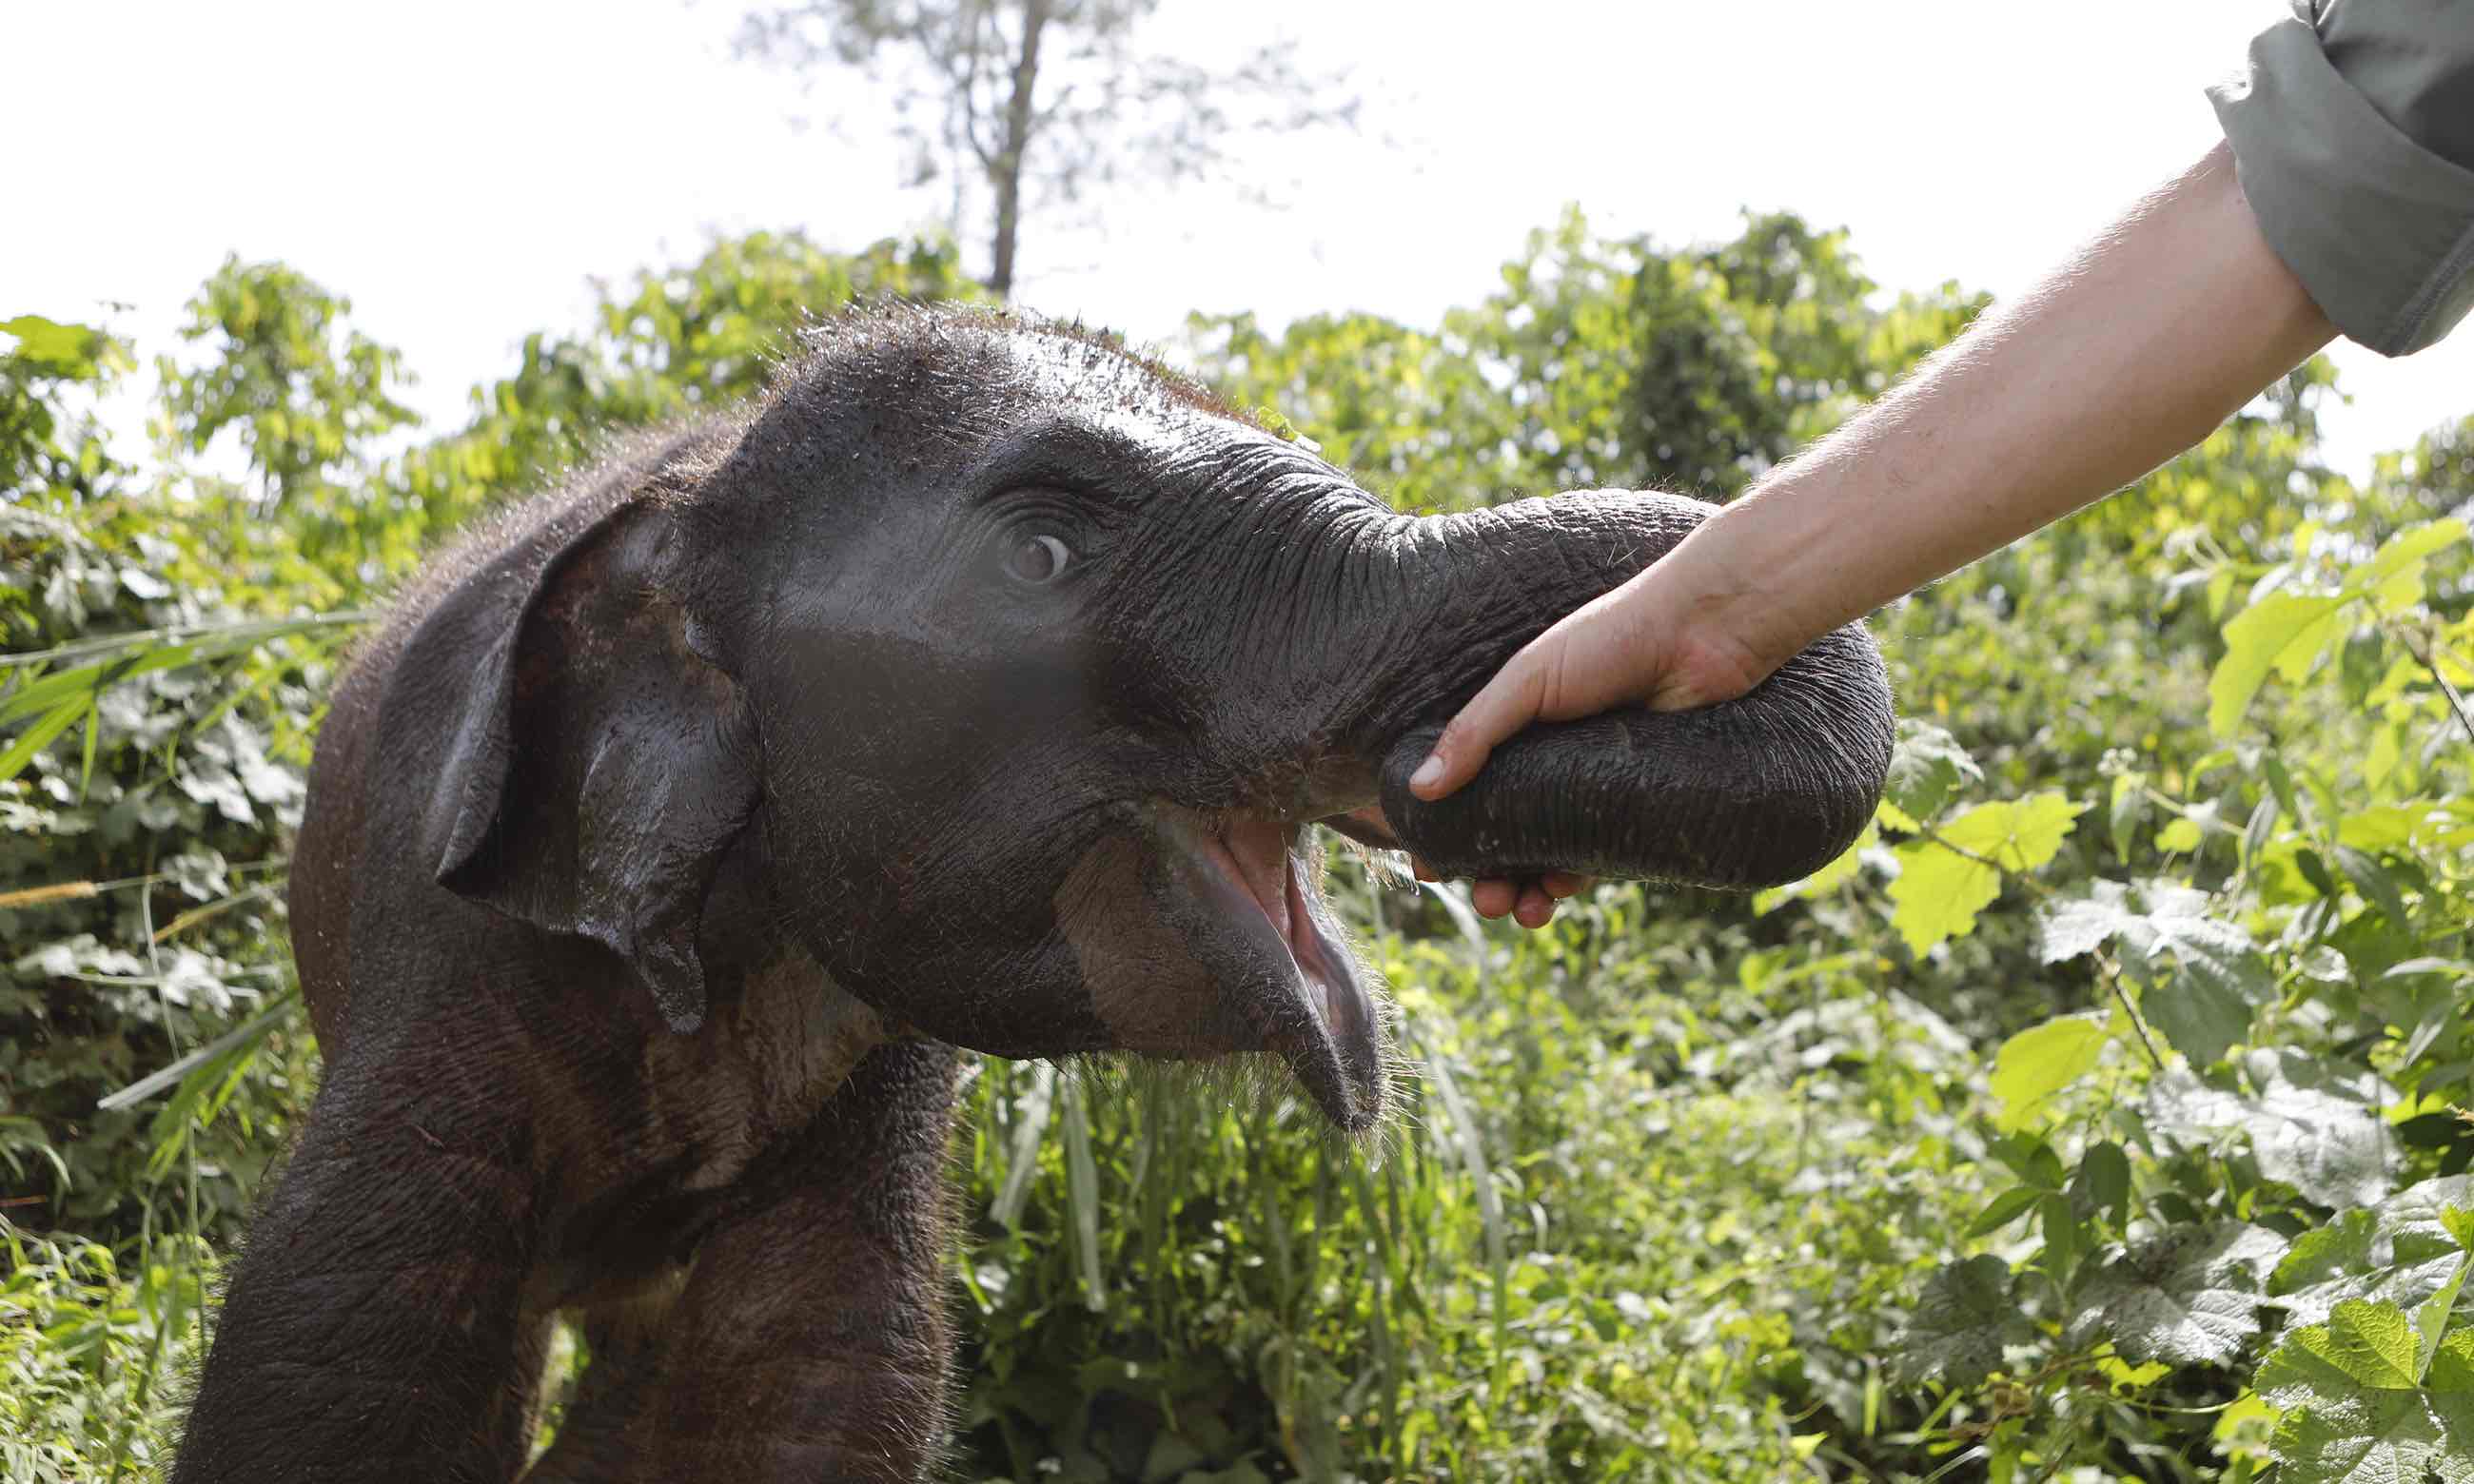 The baby elephant saved from a